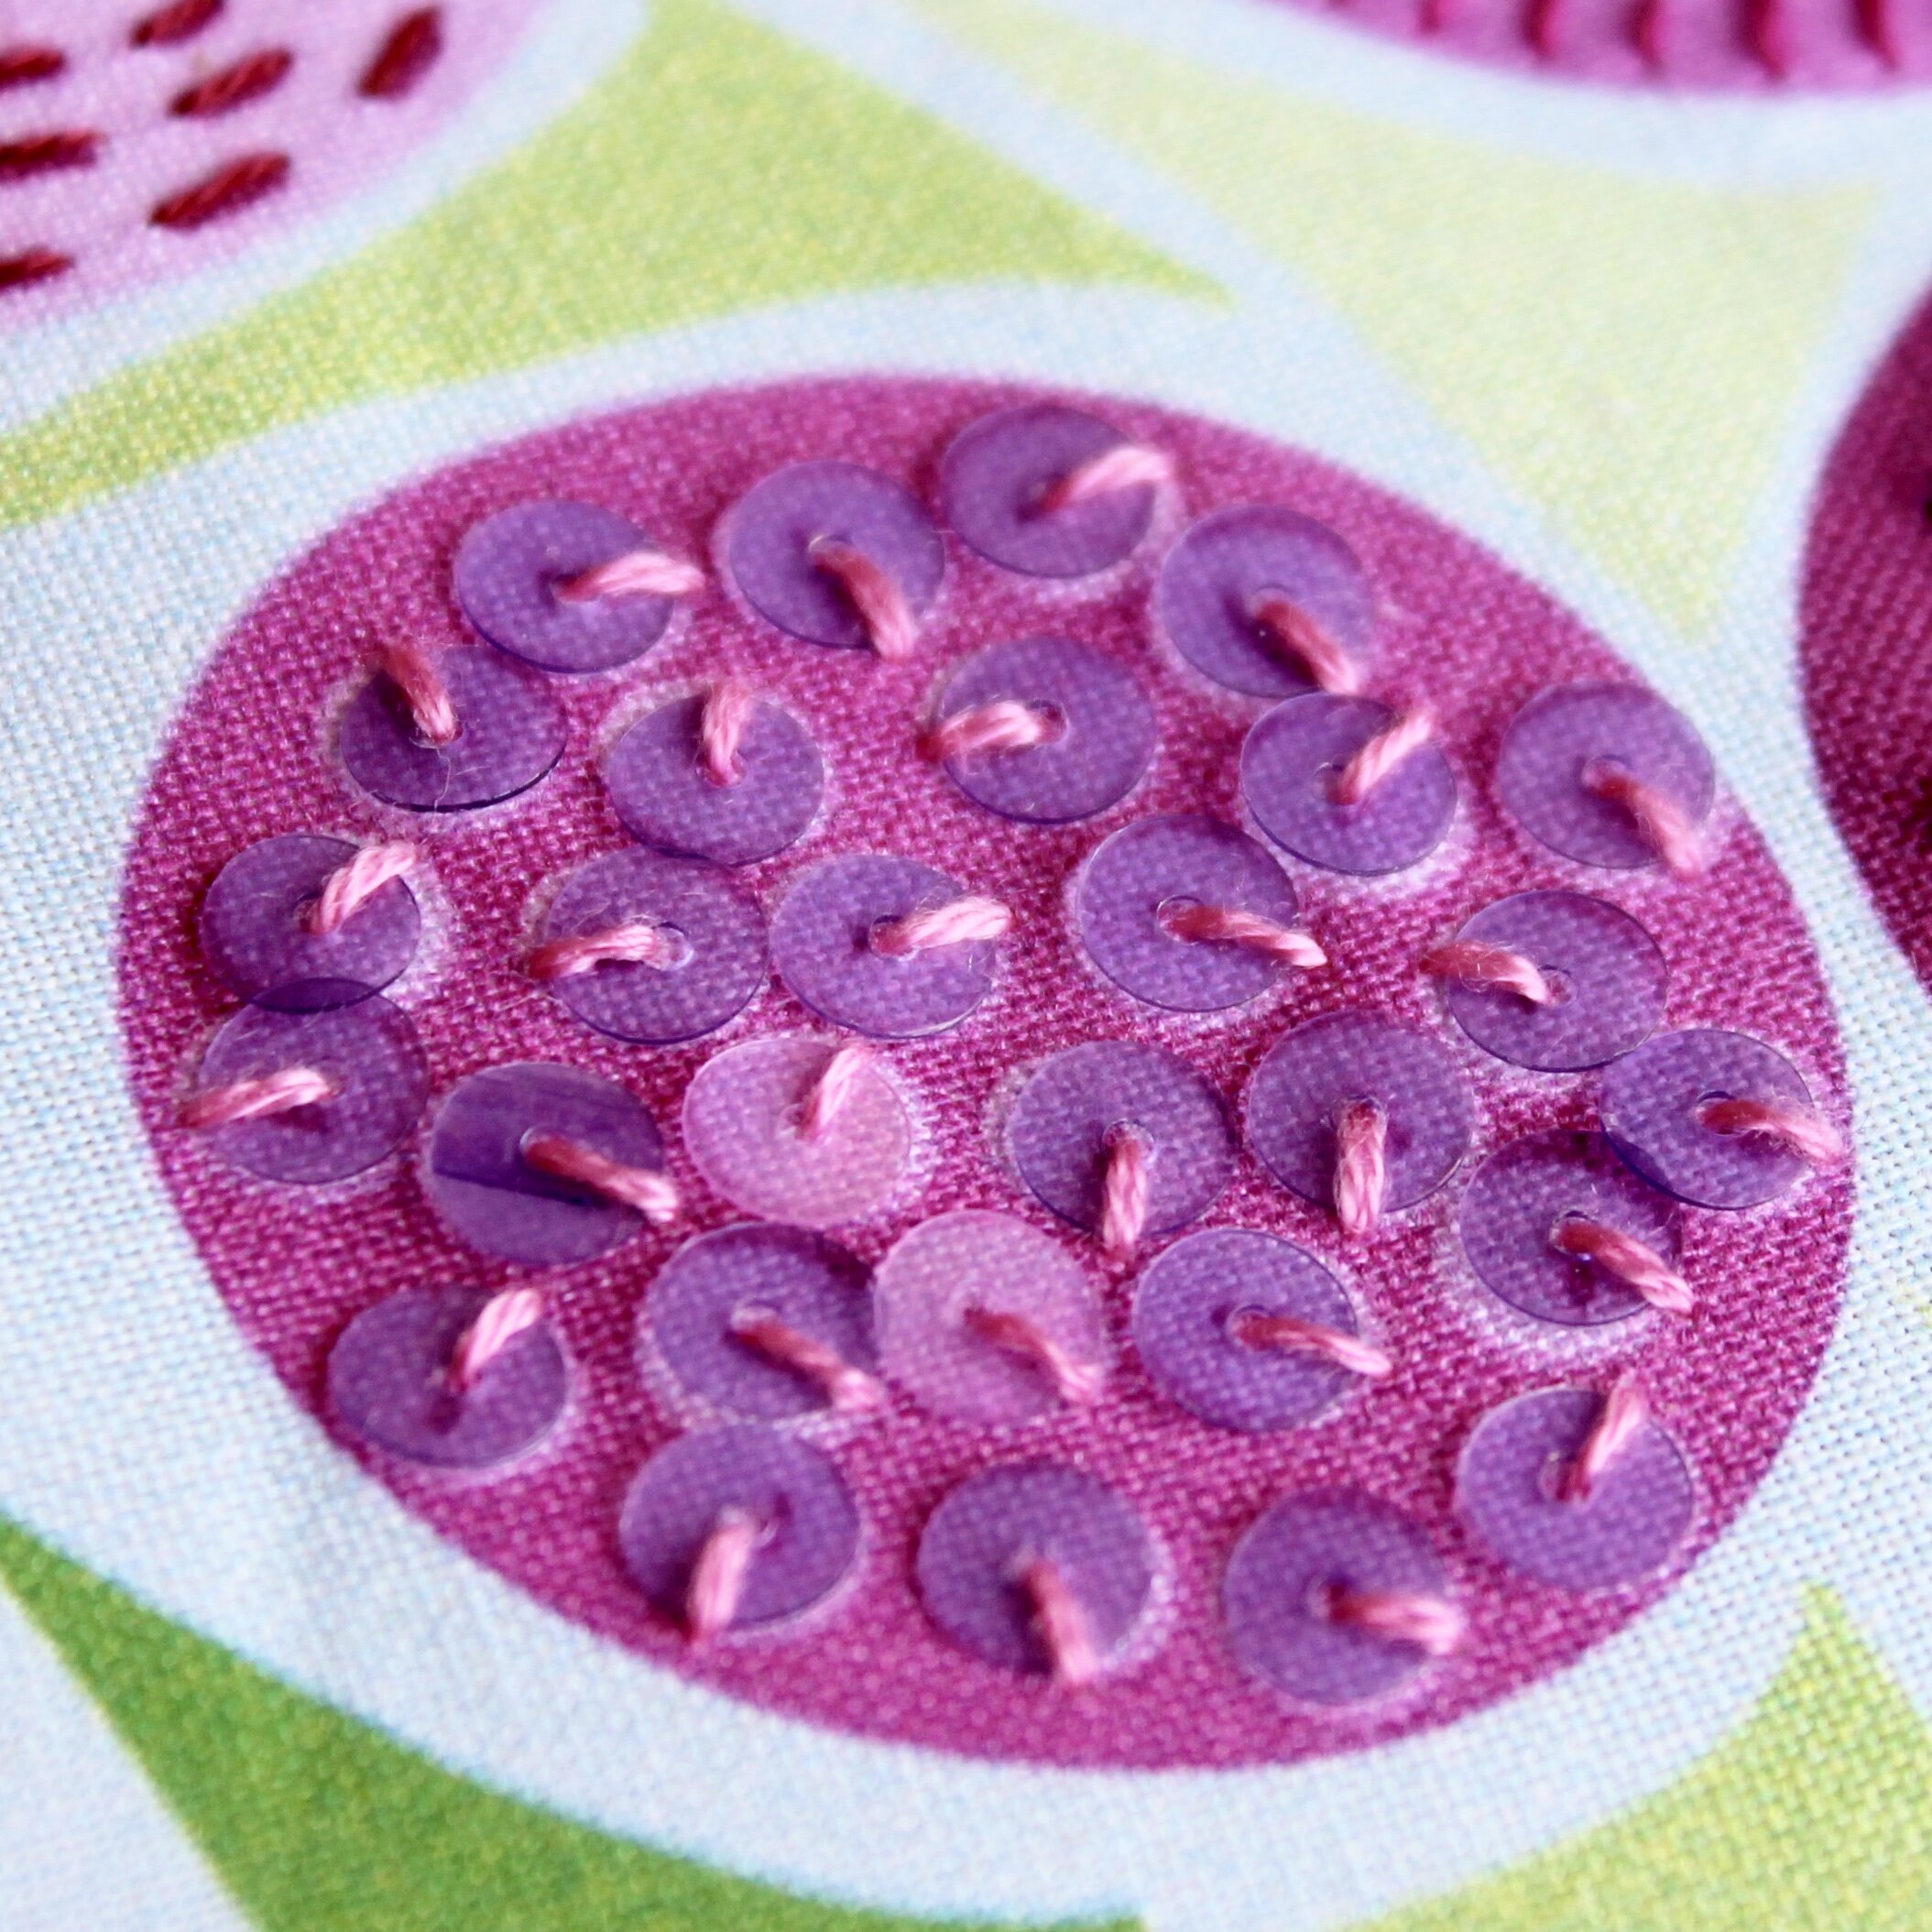 FIVE amazing stitches using beads for hand embroidery - add sparkle,  dimension & oppulence! 